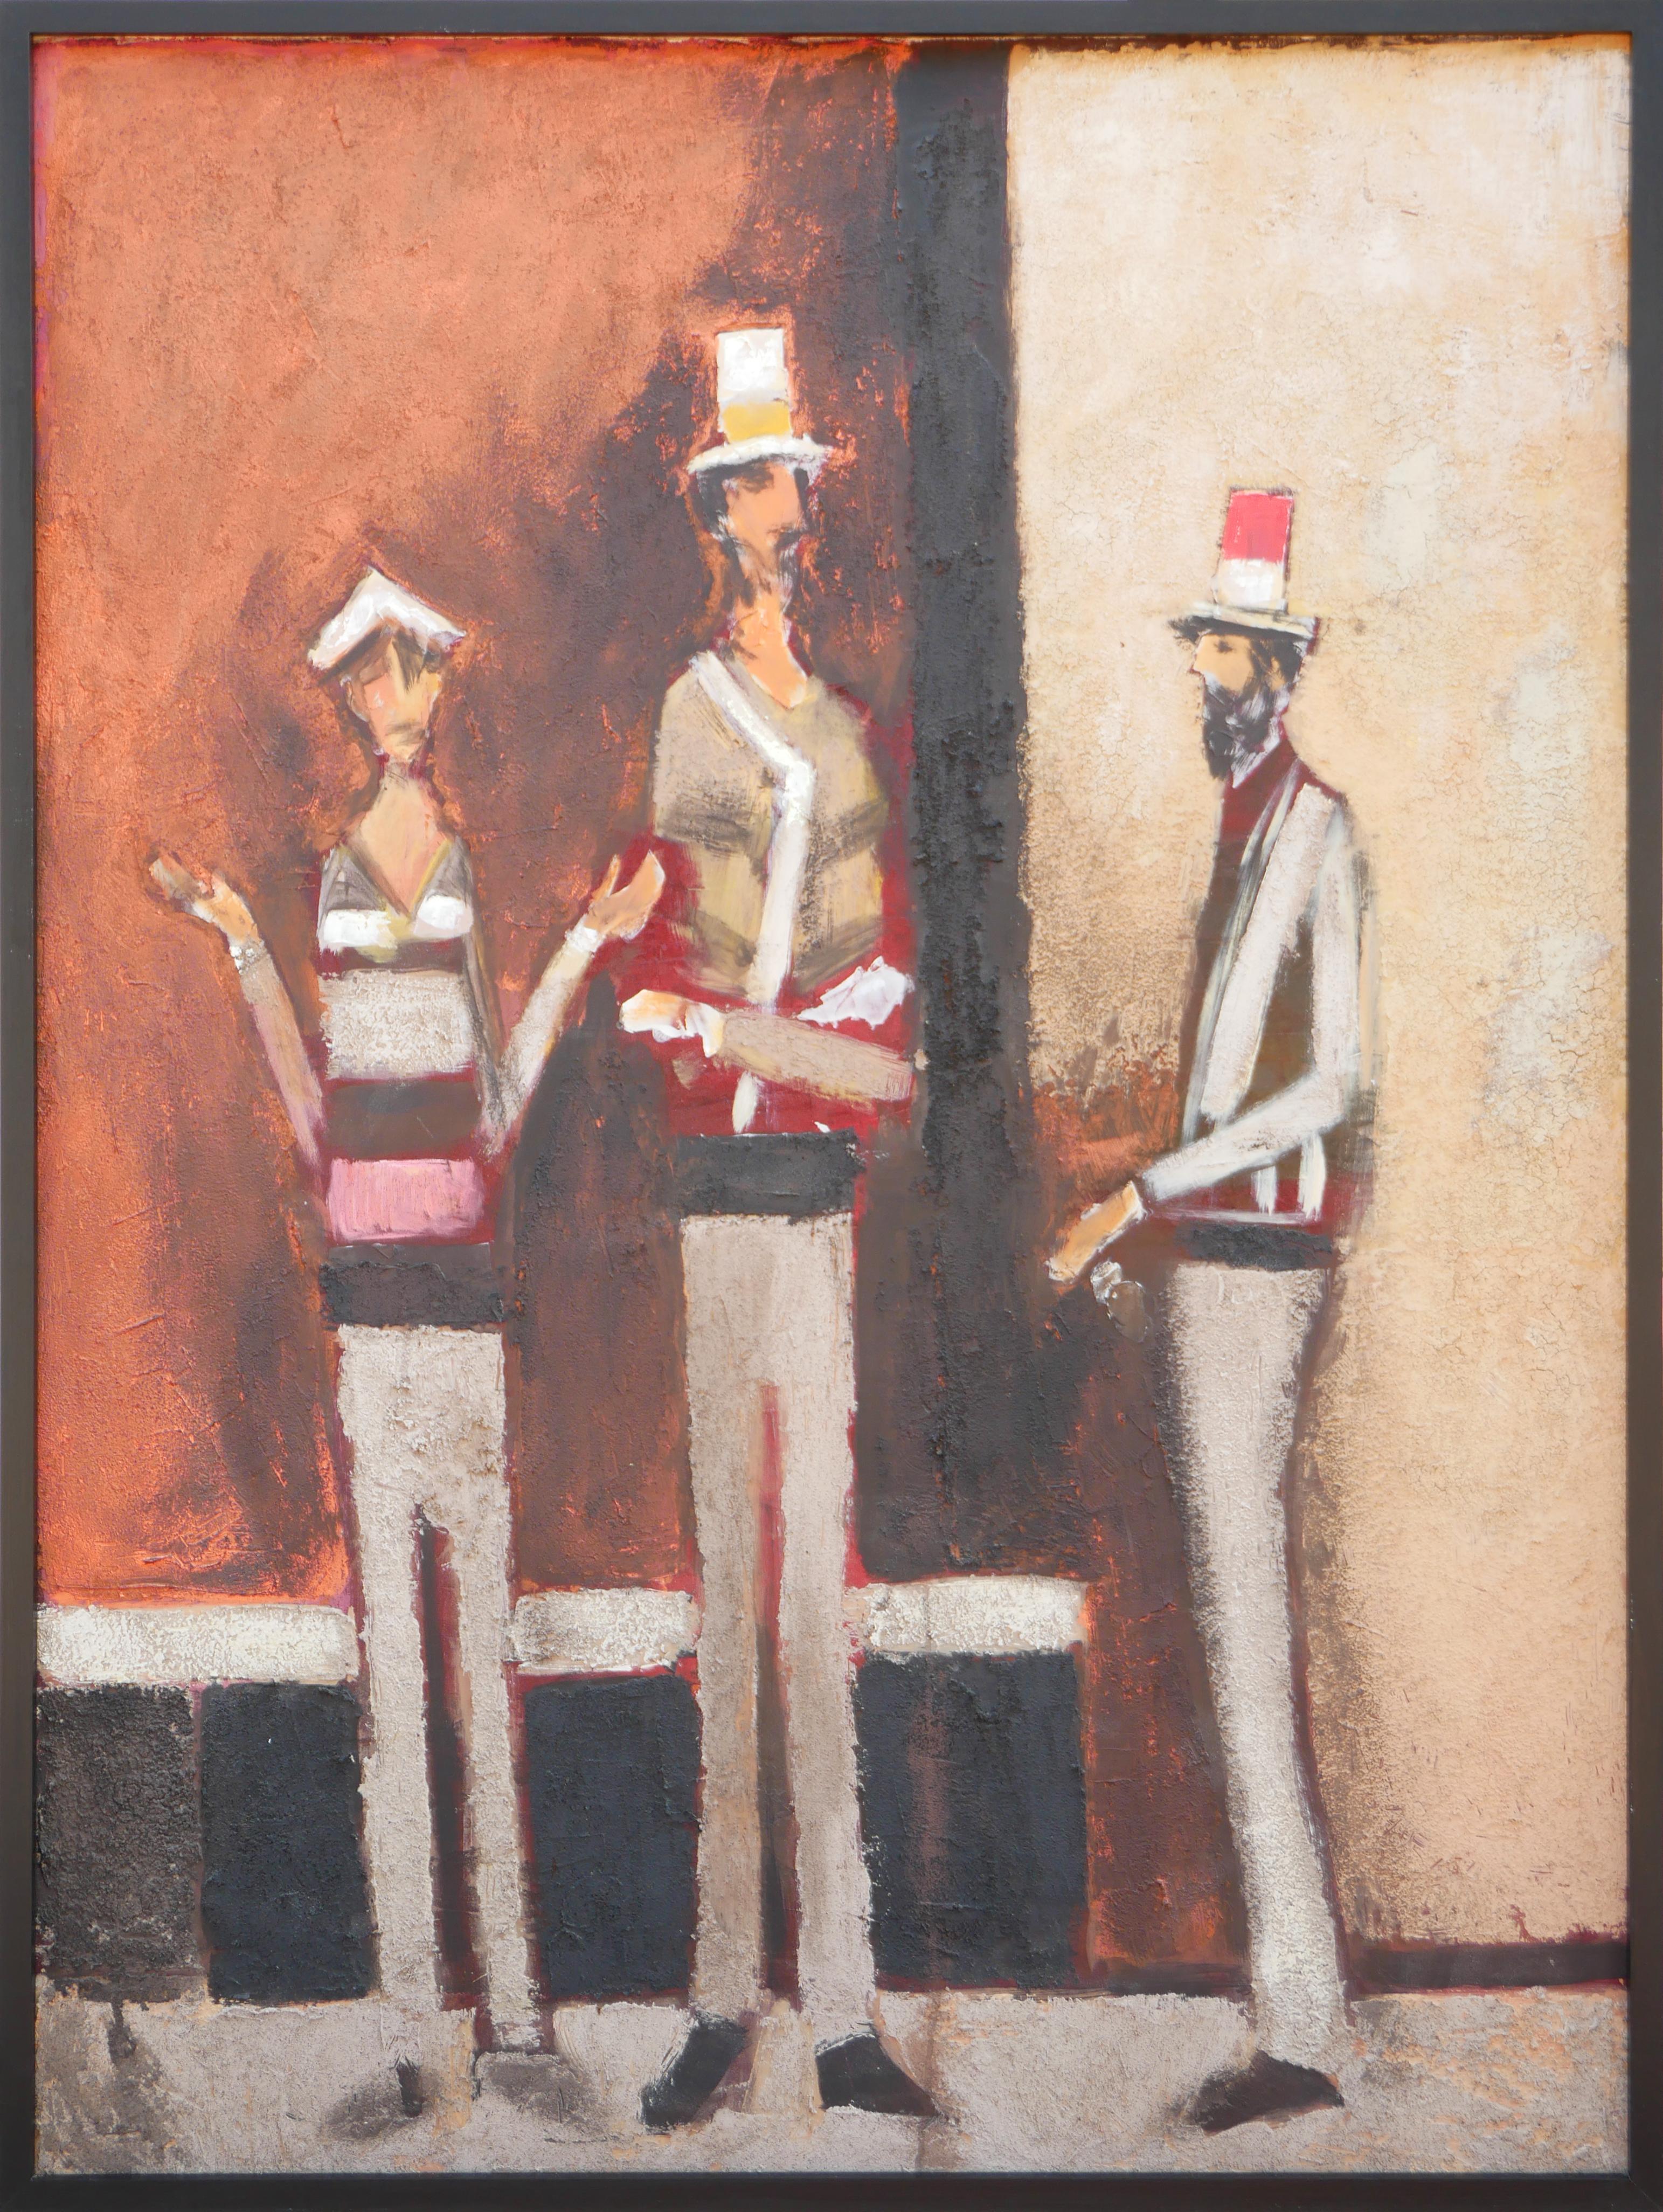 David Adickes Figurative Painting - "Three Men with Hats in an Alley" Modern Abstract Figurative Portrait Painting